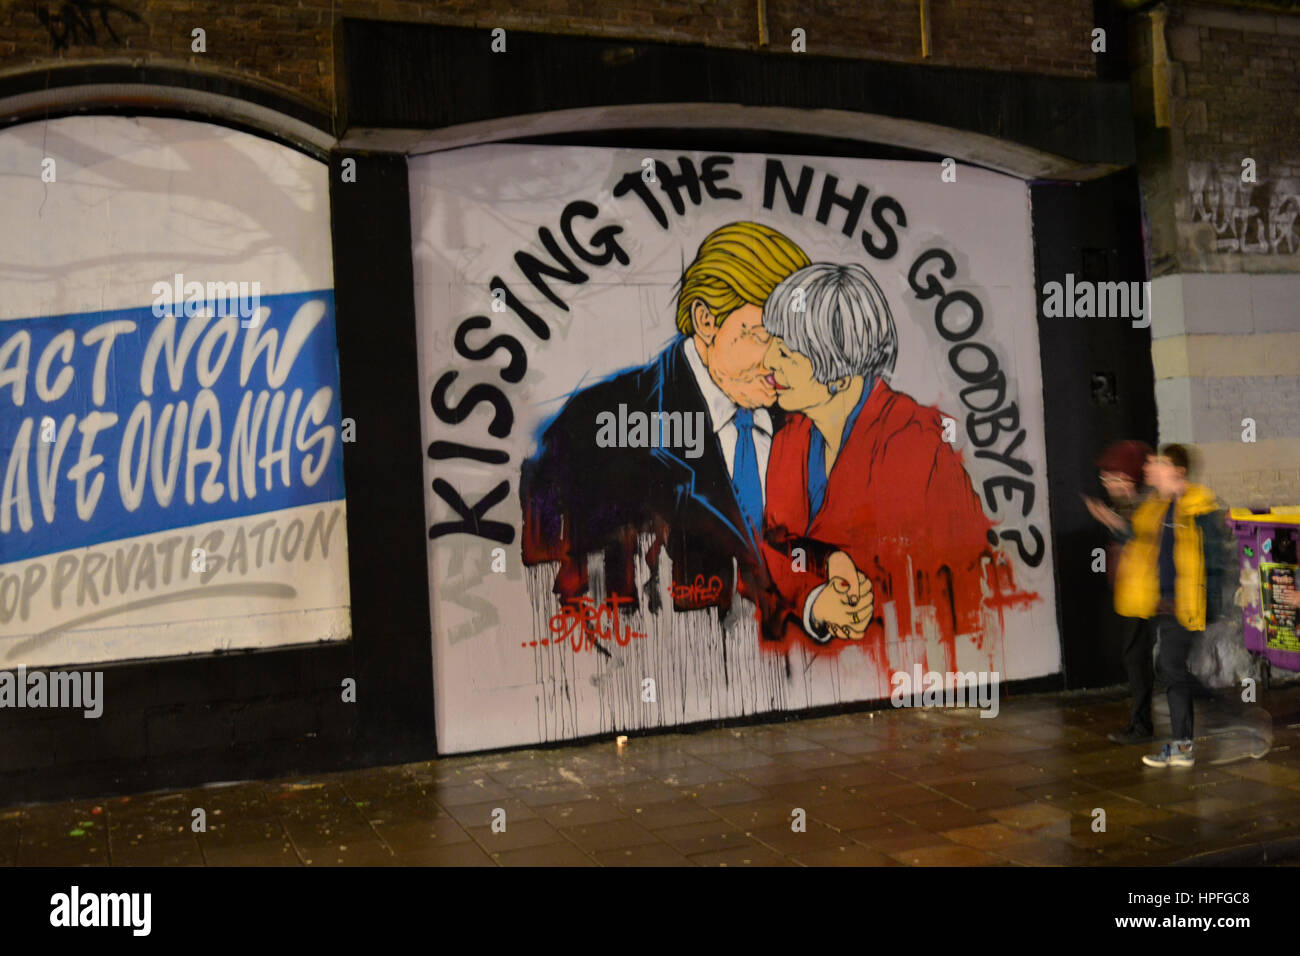 Bristol, UK. 21st Feb, 2017. A passer- by stops to look at a new mural which has appeared in Stokes Croft in Bristol, showing US.President Donald Trump and UK Prime Minister Theresa May. with the words above.KISSING THE N.H.S GOODBYE. A previous mural in the same place Last Year showed Donald Trump and Boris Johnson in an Embrace. Credit: Robert Timoney/Alamy Live News Stock Photo